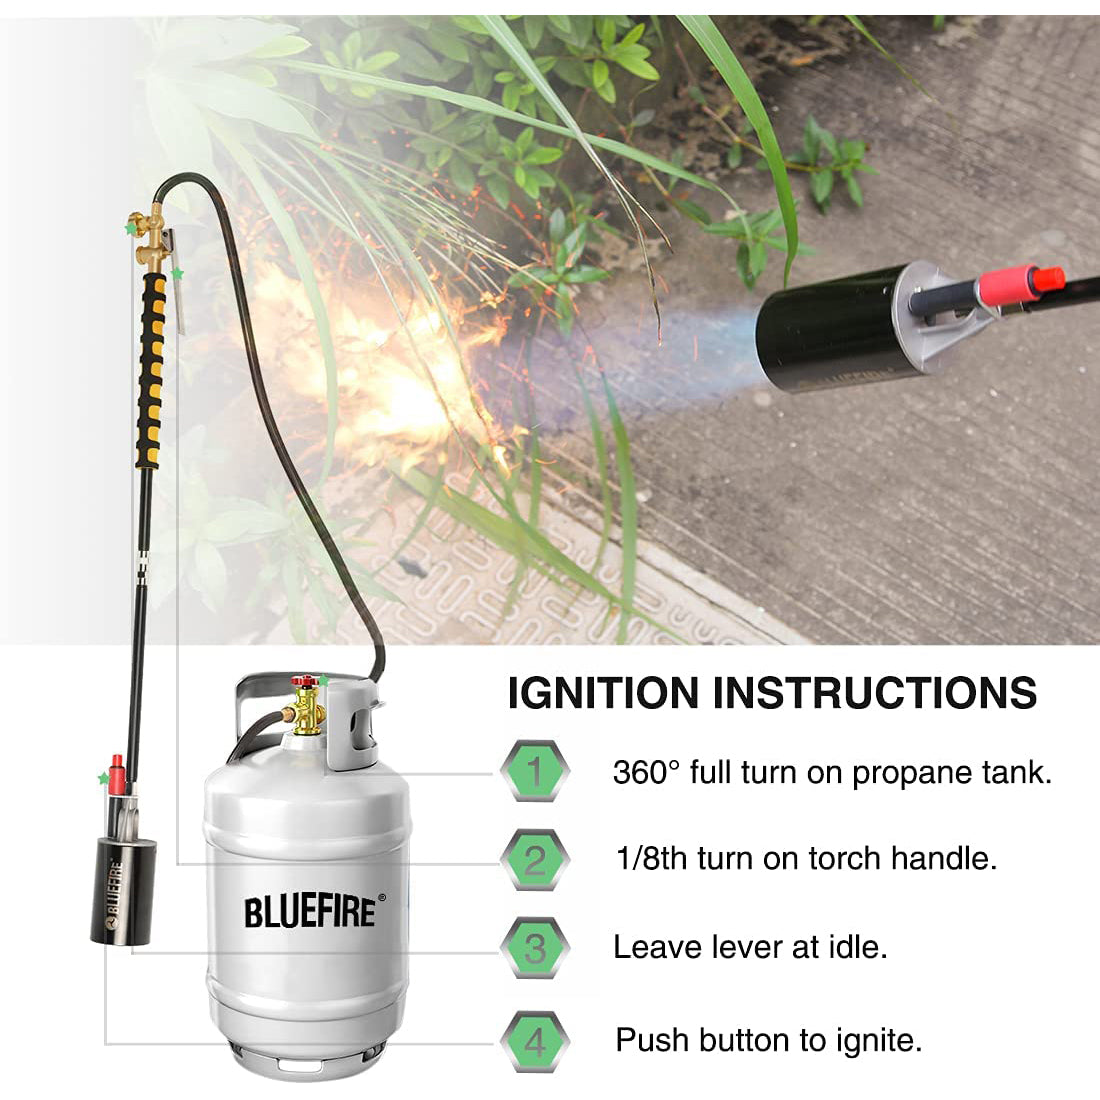 Propane Torch Weed Torch Weed Burner - Electri Automatic Ignition